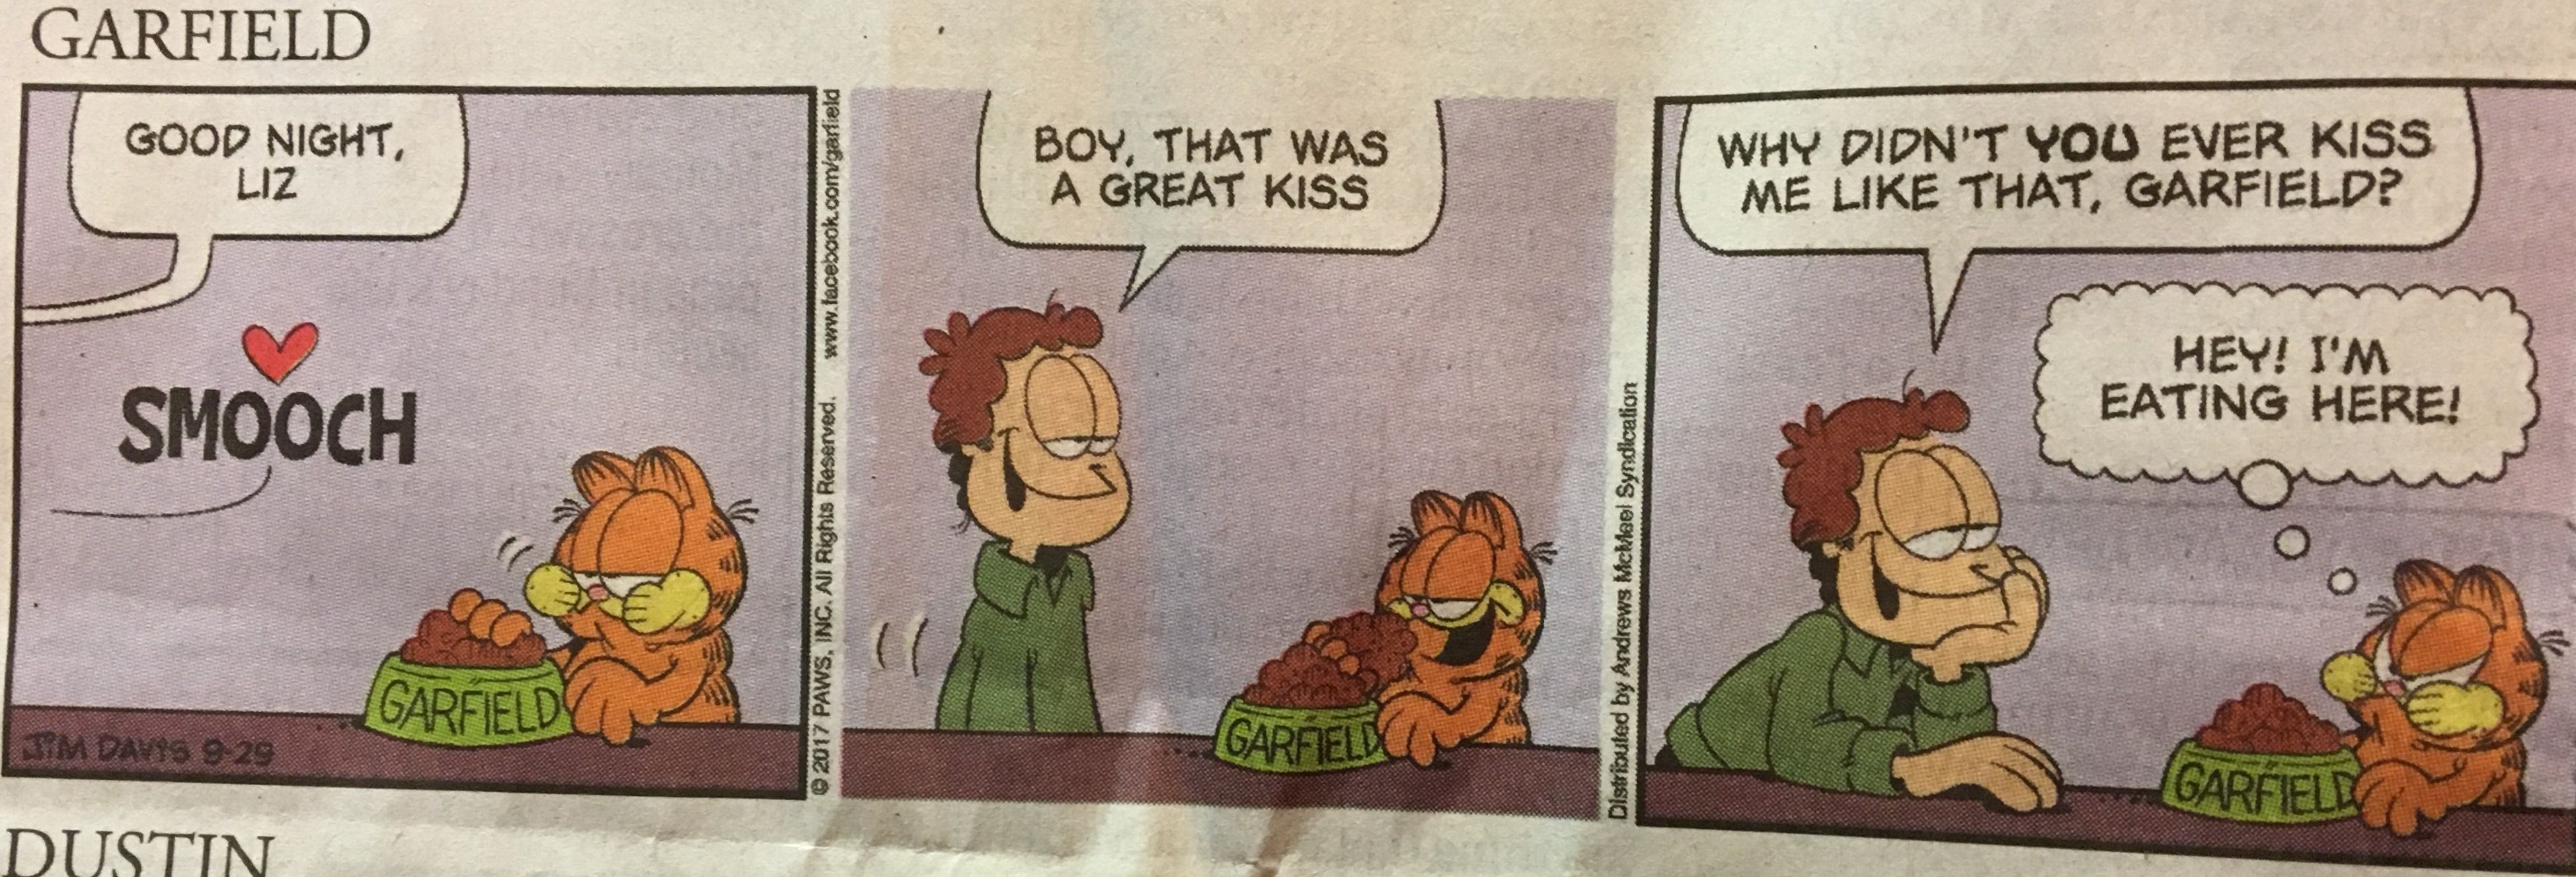 WTF even is Garfield anymore...